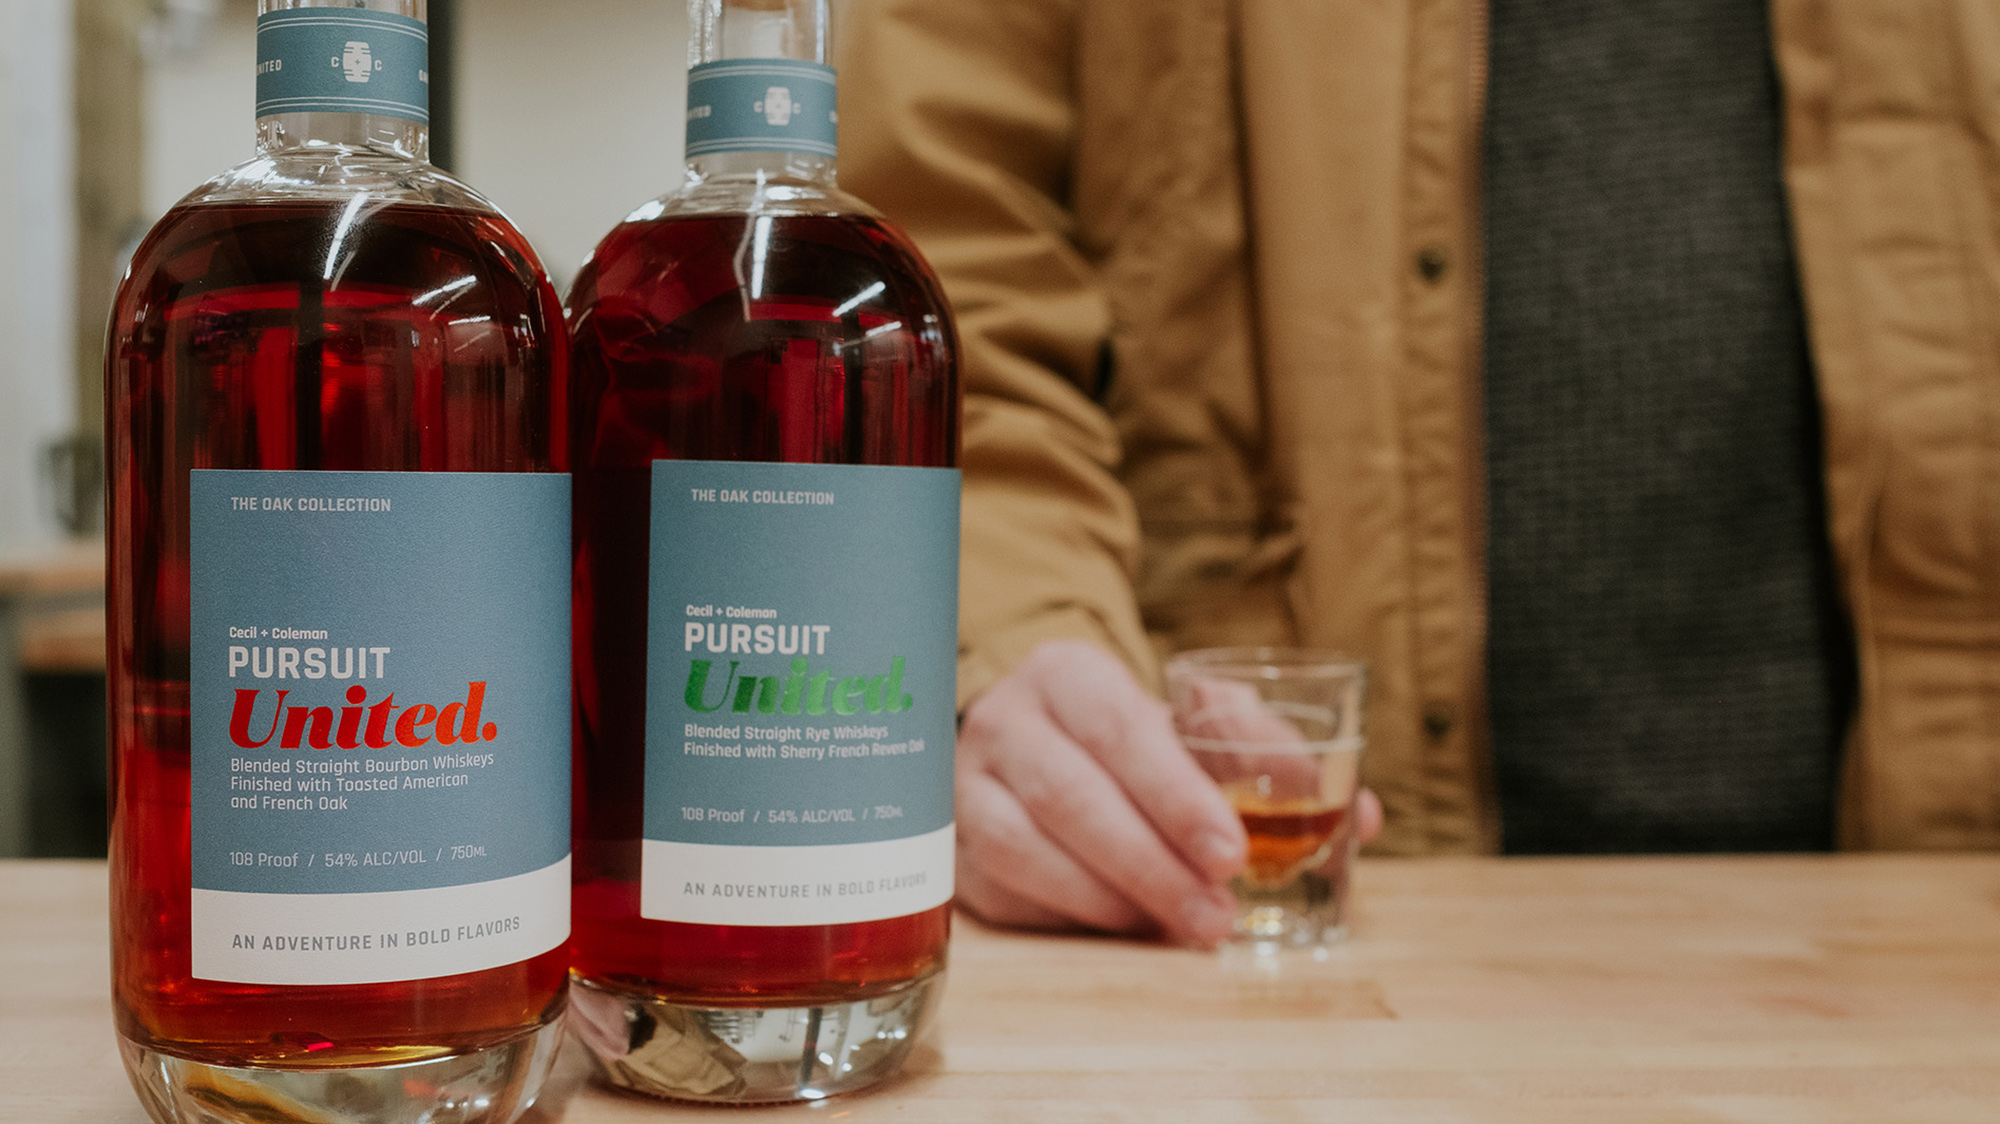 Pursuit Is Releasing A Collection Of Bourbon And Rye Whiskeys Finished In Different Barrels